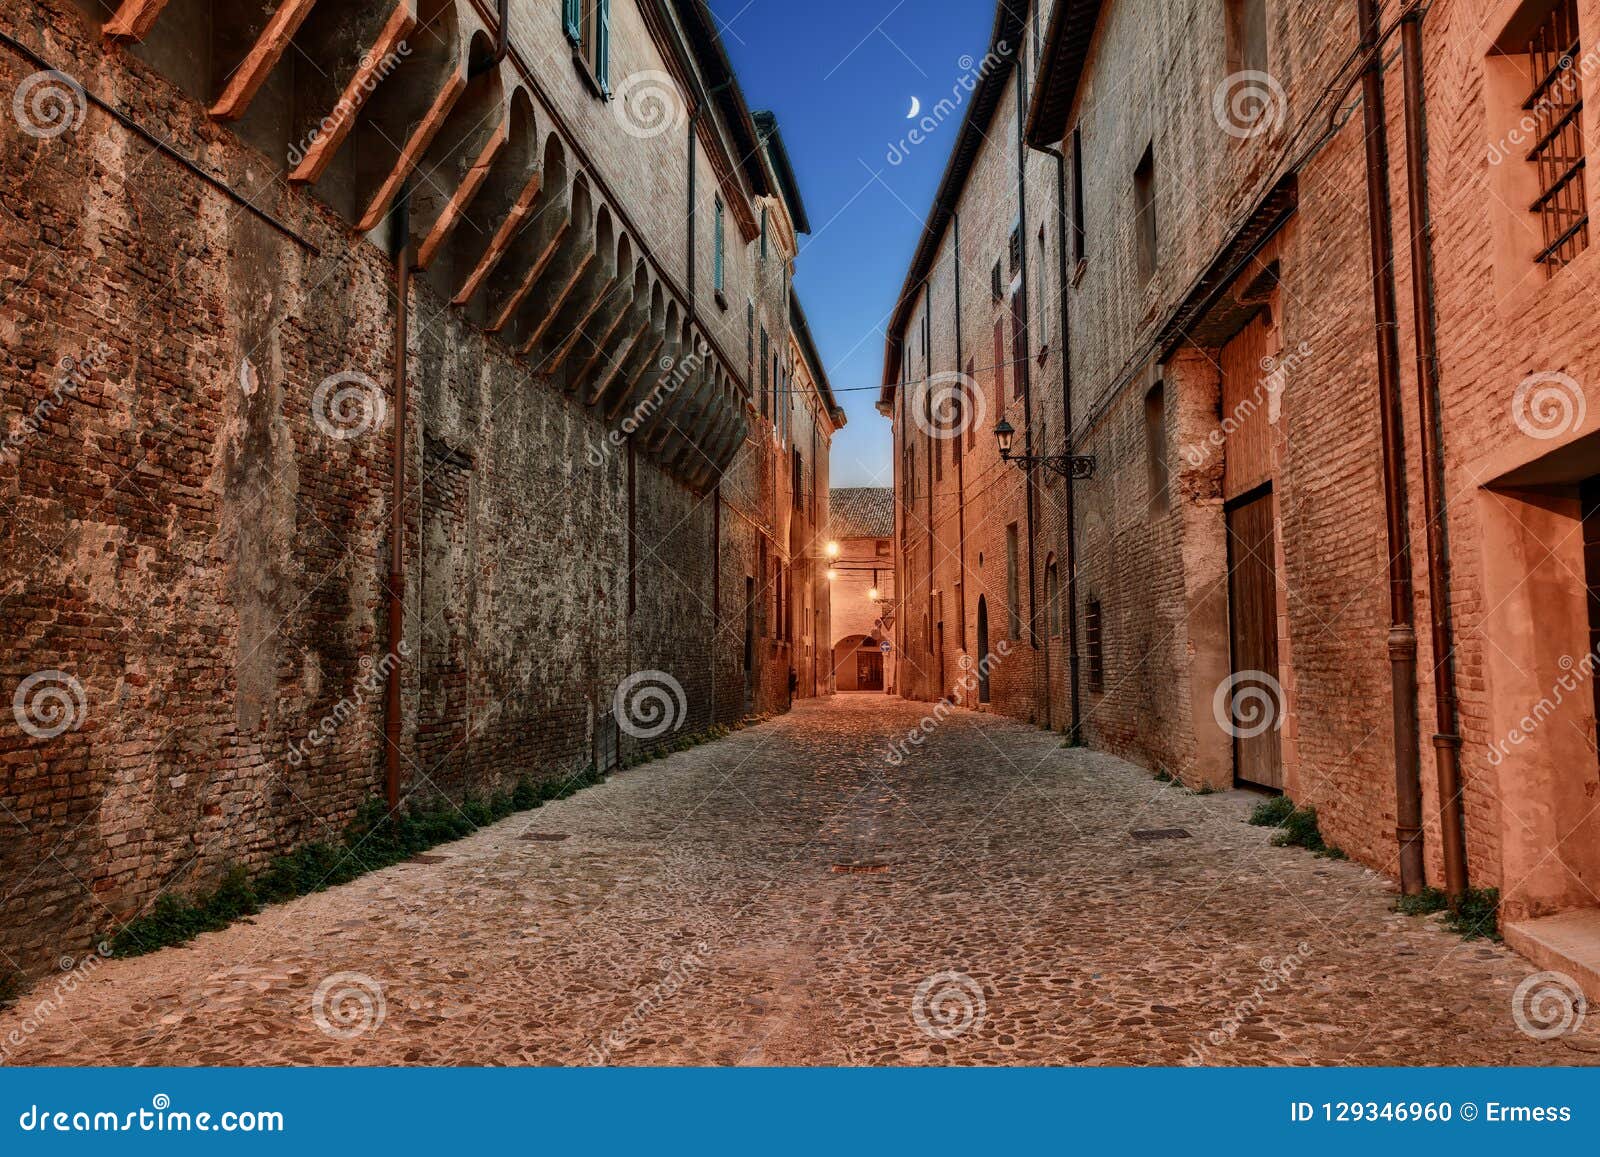 forli, emilia romagna, italy: ancient alley in the old town